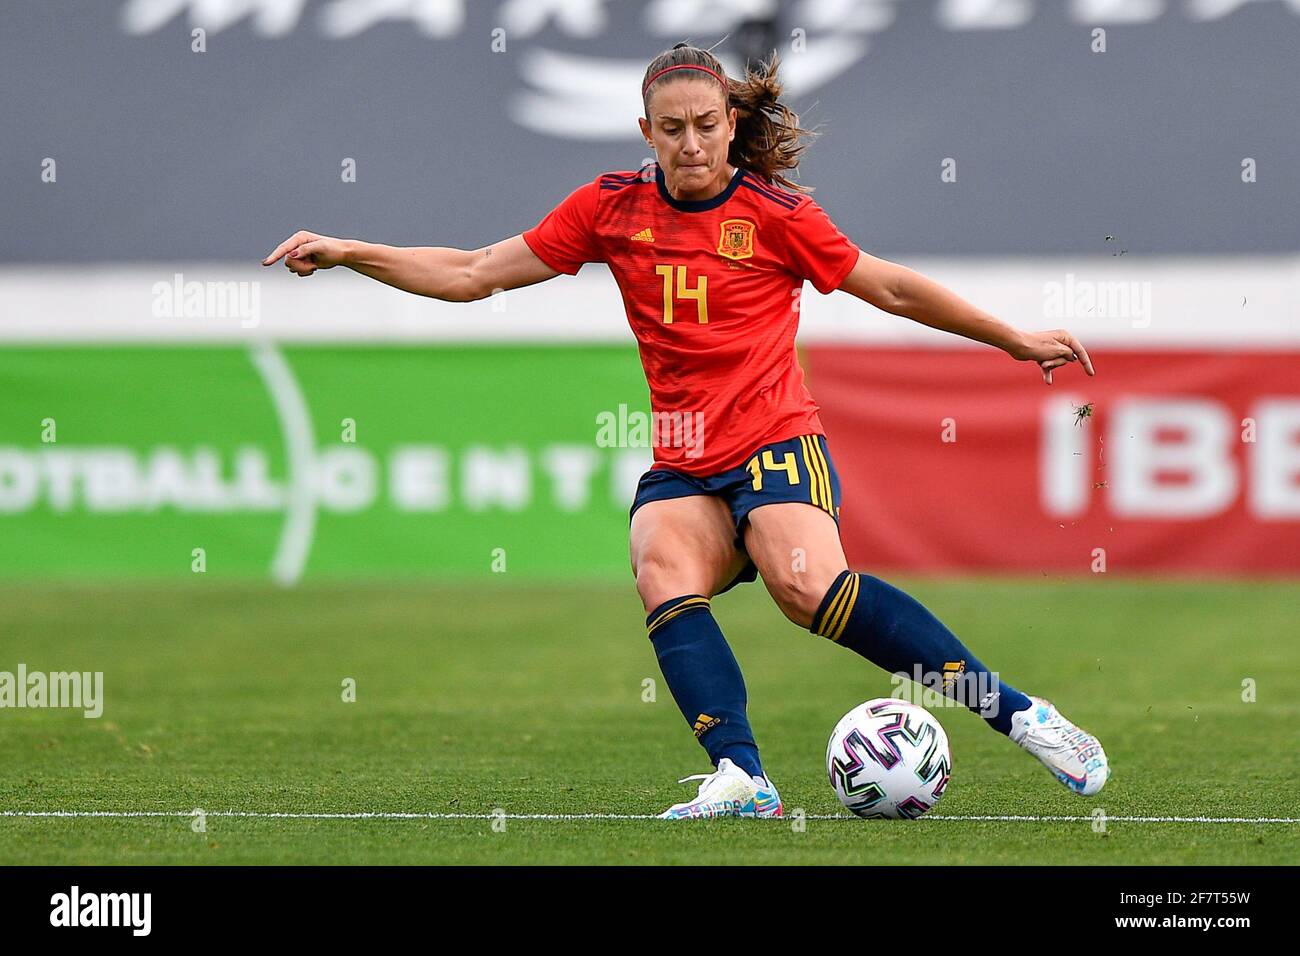 Marbella Spain April 9 Alexia Putellas Segura Of Spain During The Women S International Friendly Match Between Spain And Netherlands At Estadio Municipal De Marbella On April 9 2021 In Marbella Spain